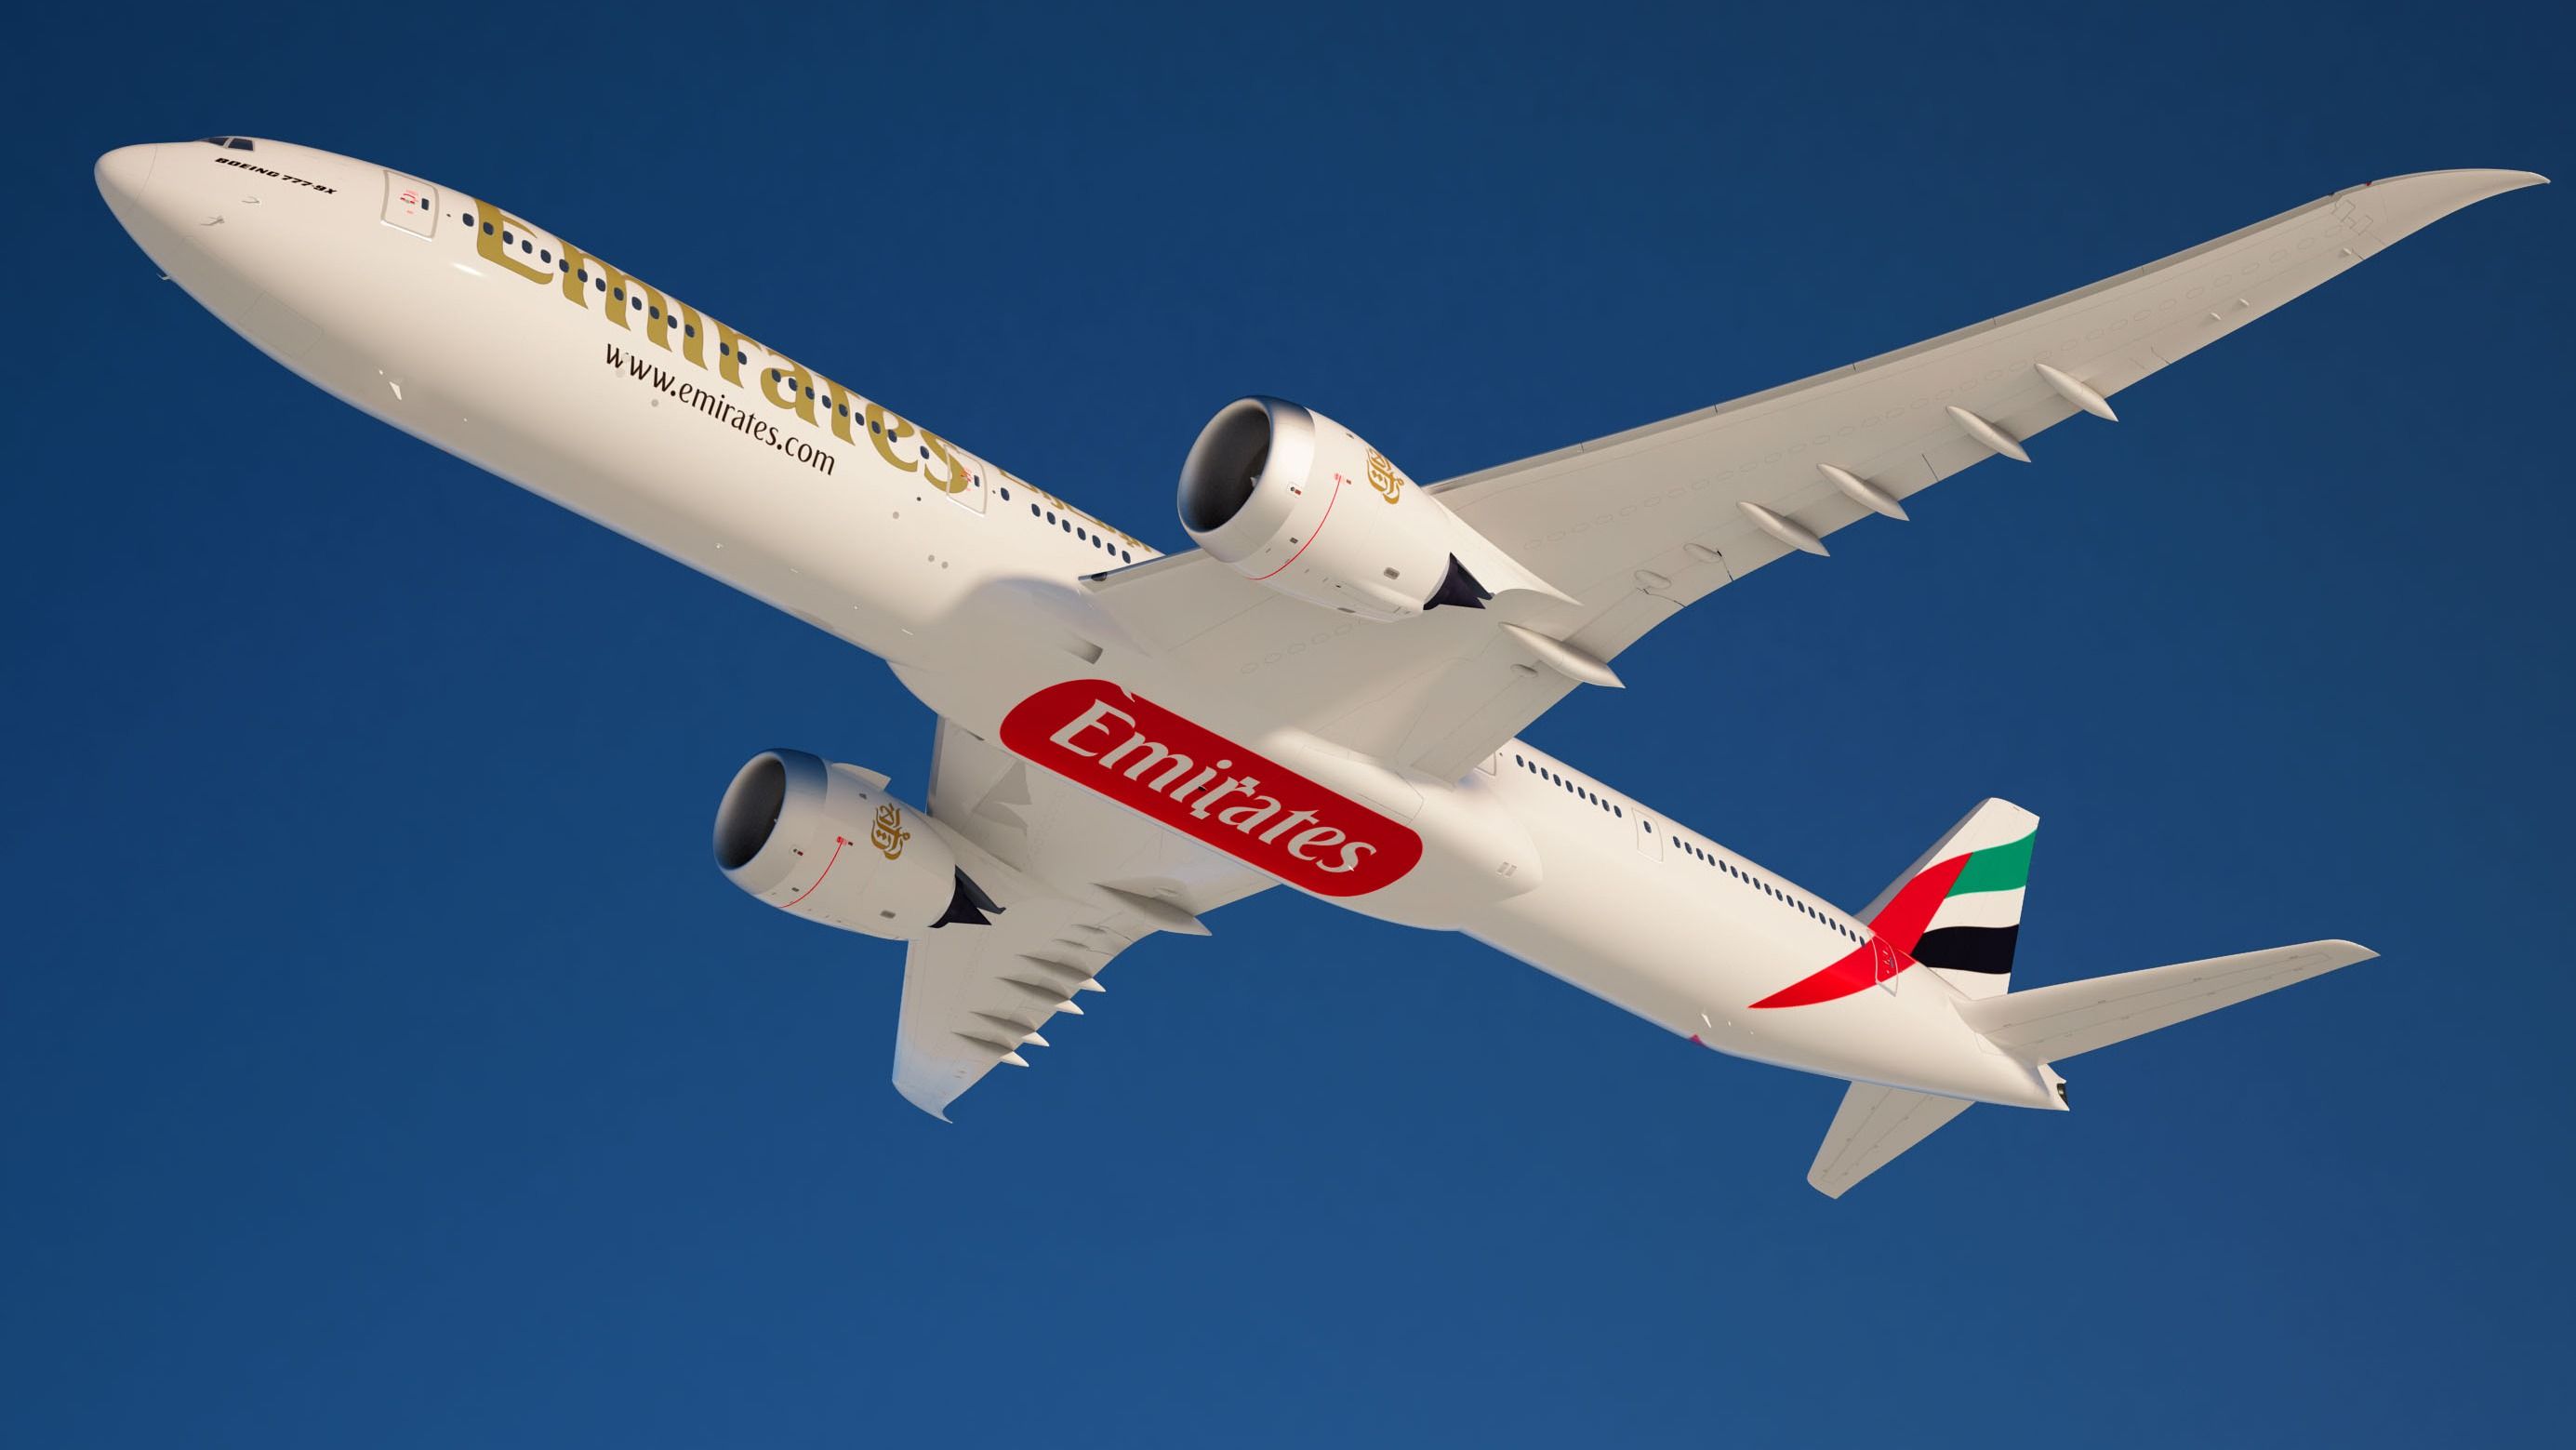 A Render of an Emirates Boeing 777X aircraft flying in the sky.